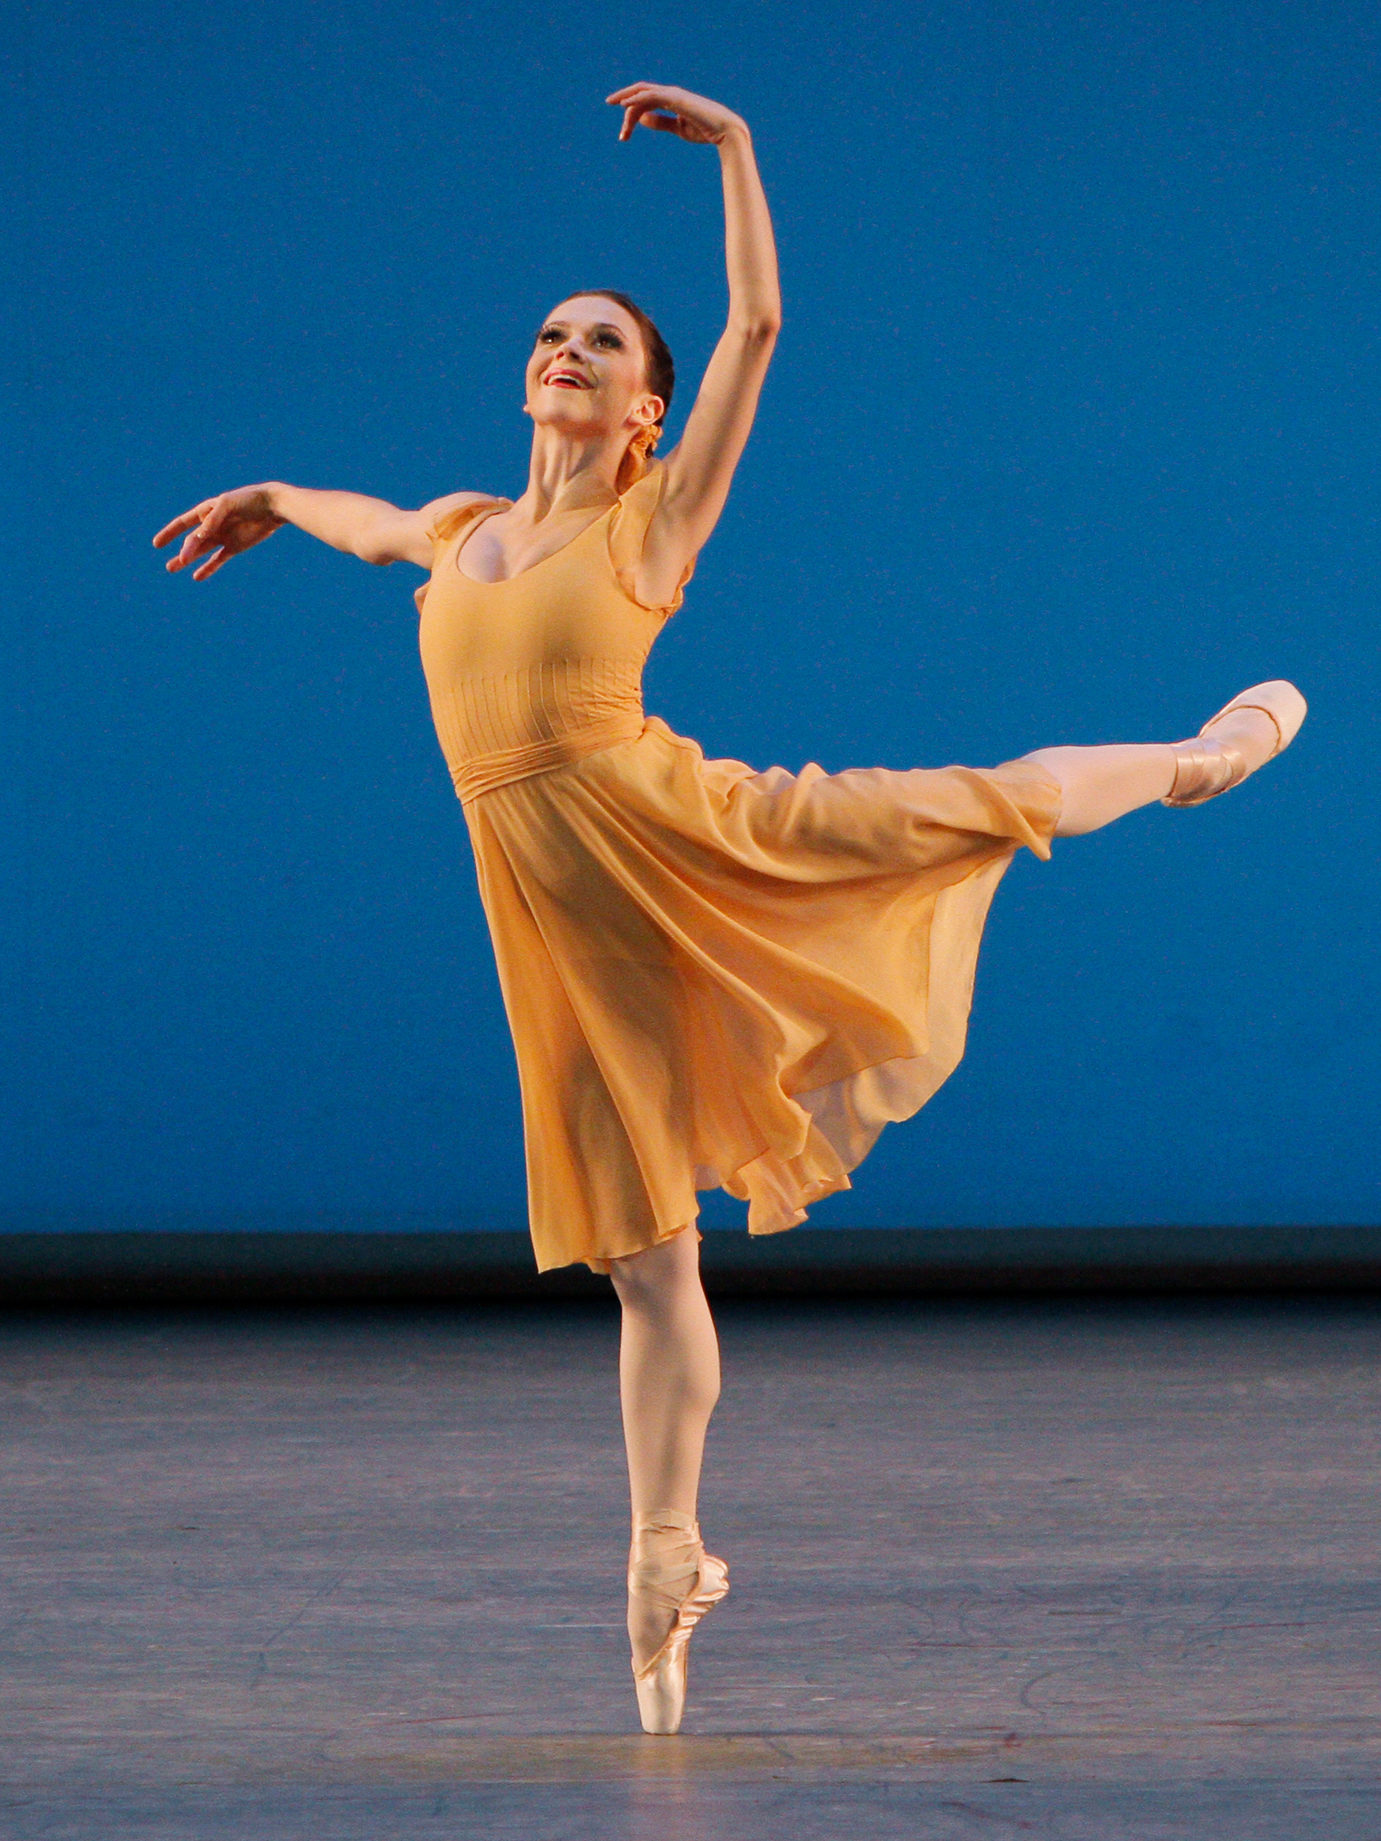 NYCB principal dancer Megan Fairchild in Dances at a Gathering wearing an orange dress against a blue background. She holds an attitude derriere with arms in fourth